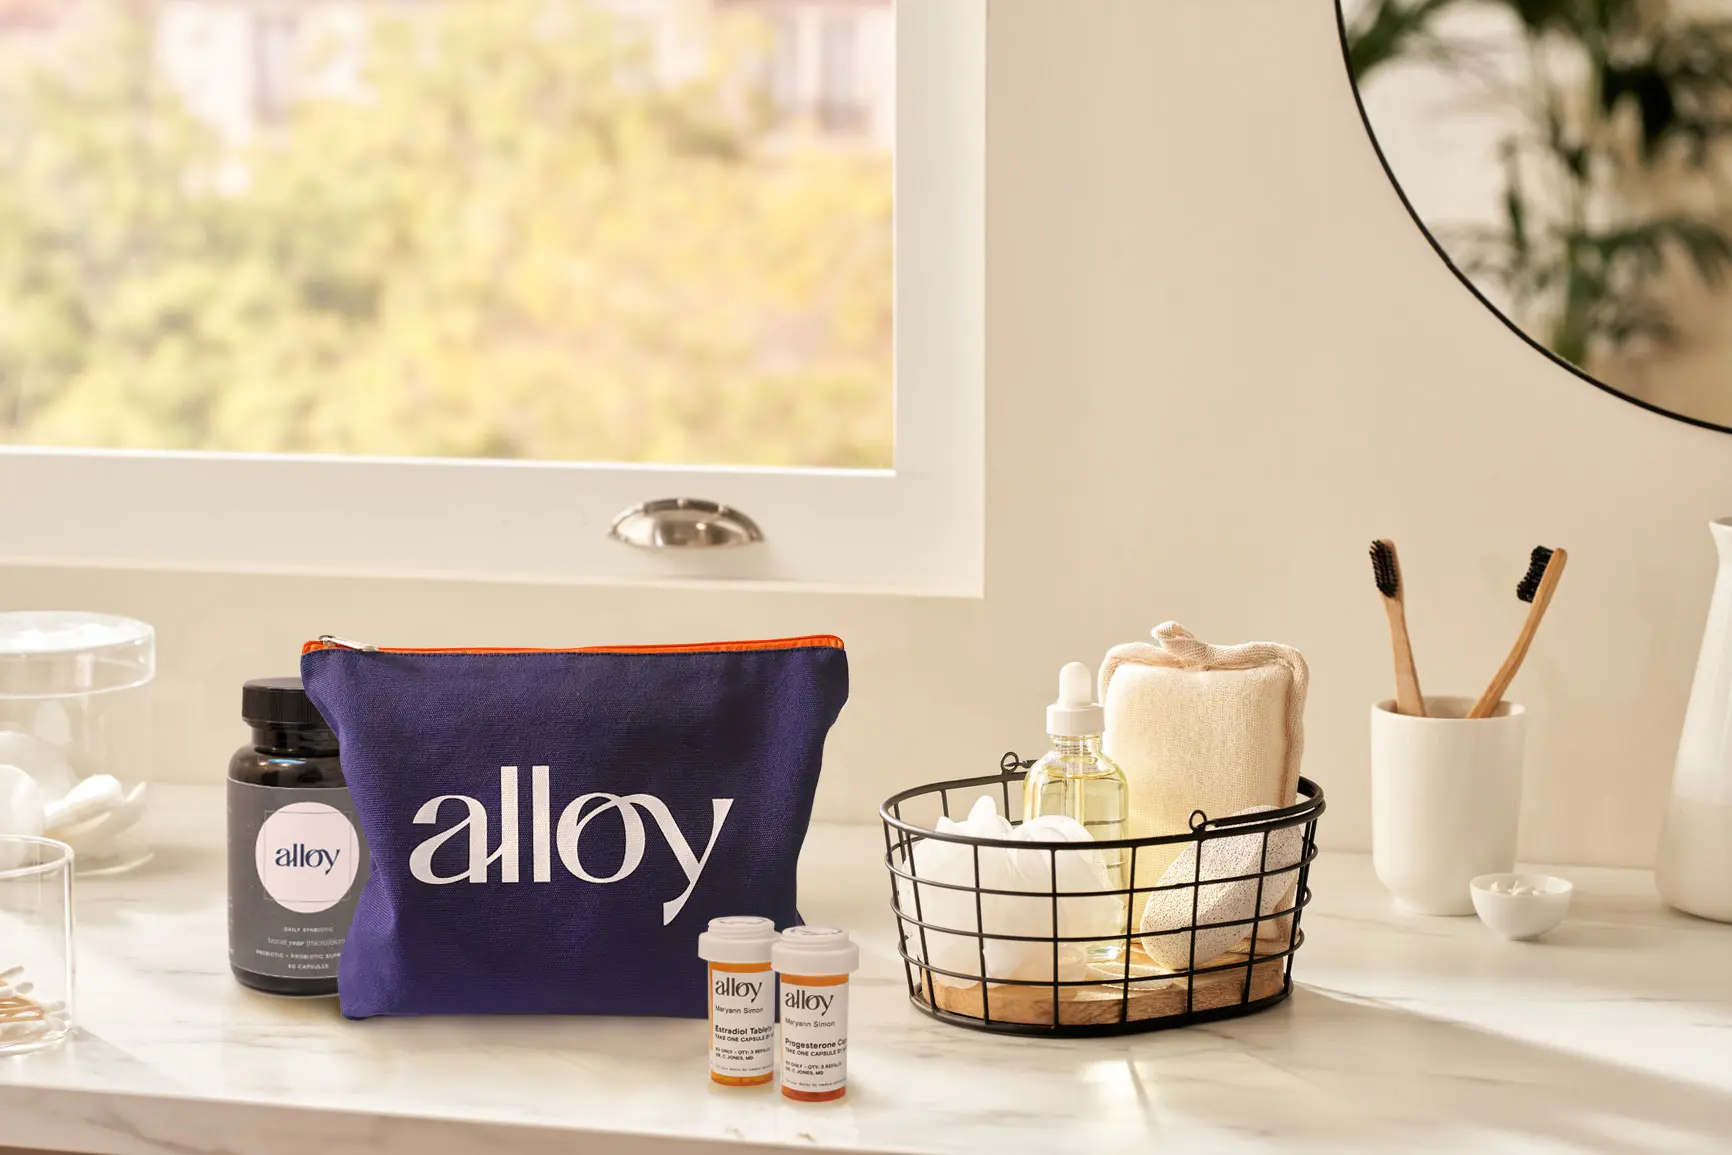 Alloy Pouch and products on bathroom counter.